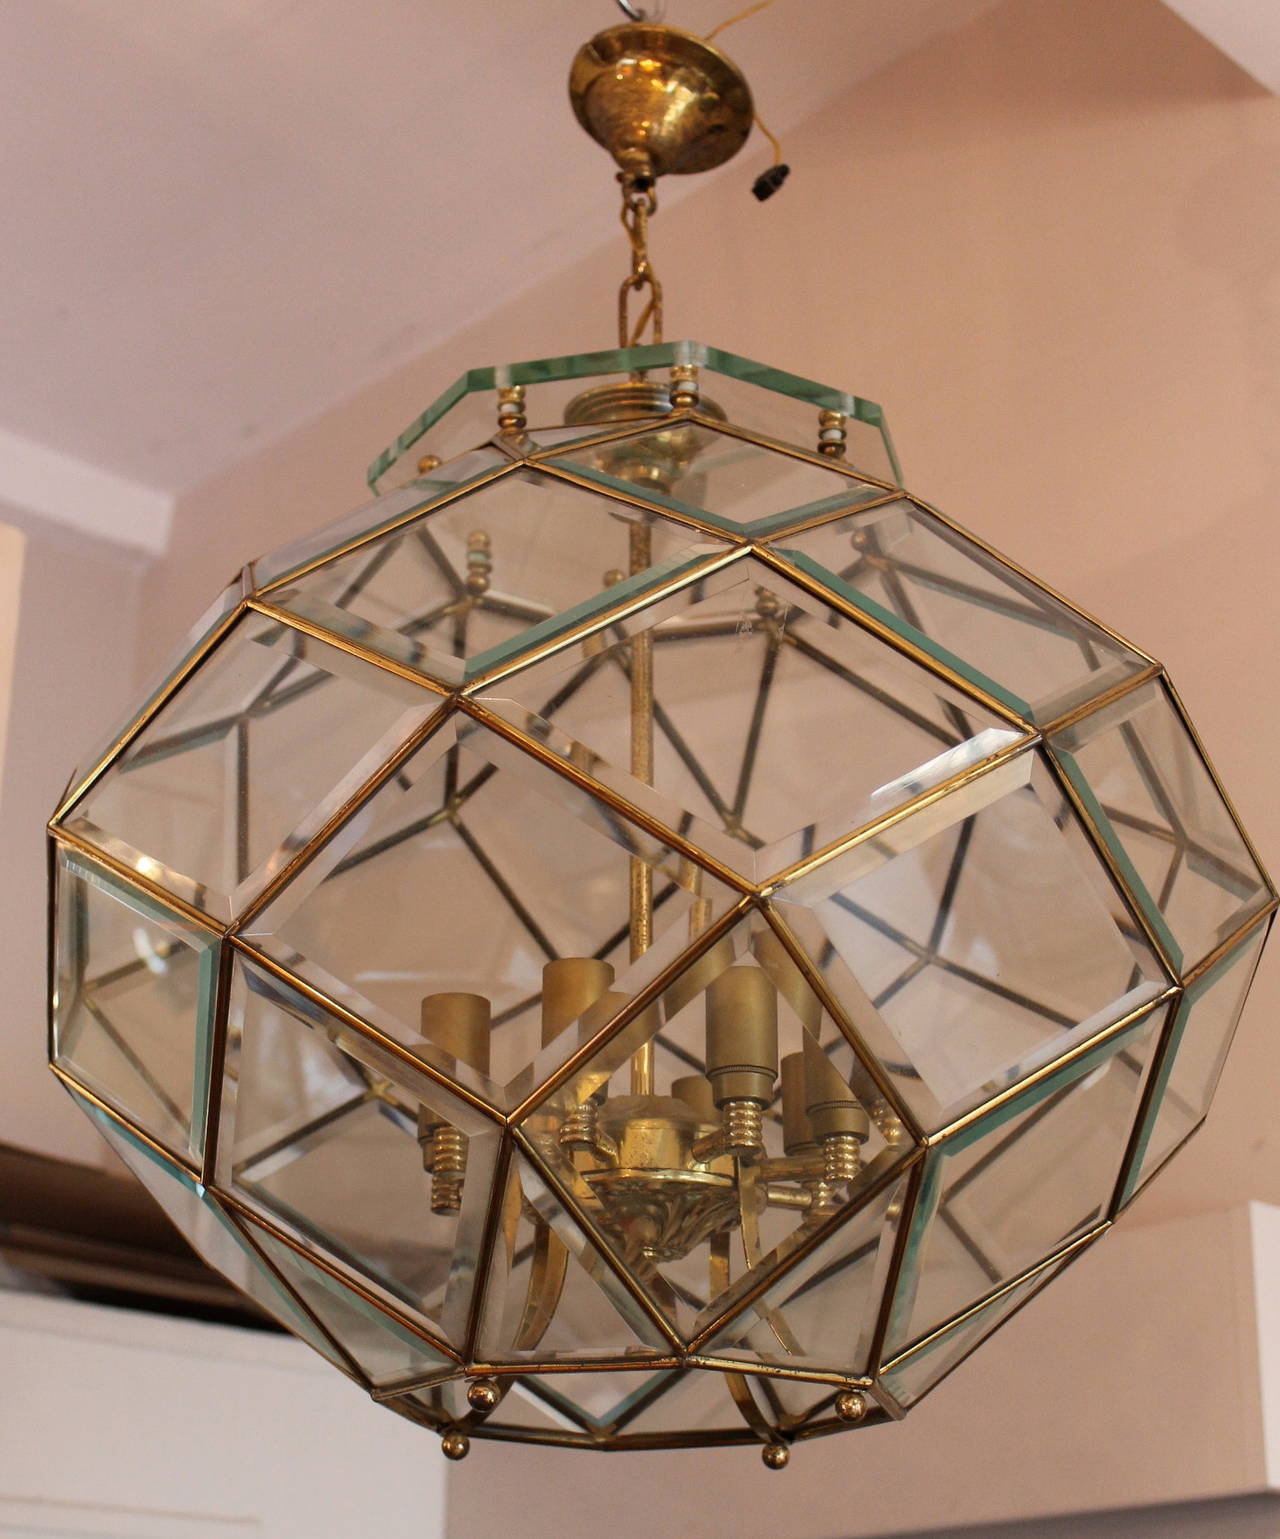 Luminaire with beveled glass plates.
brass structure
Year 50 in good condition
Italy